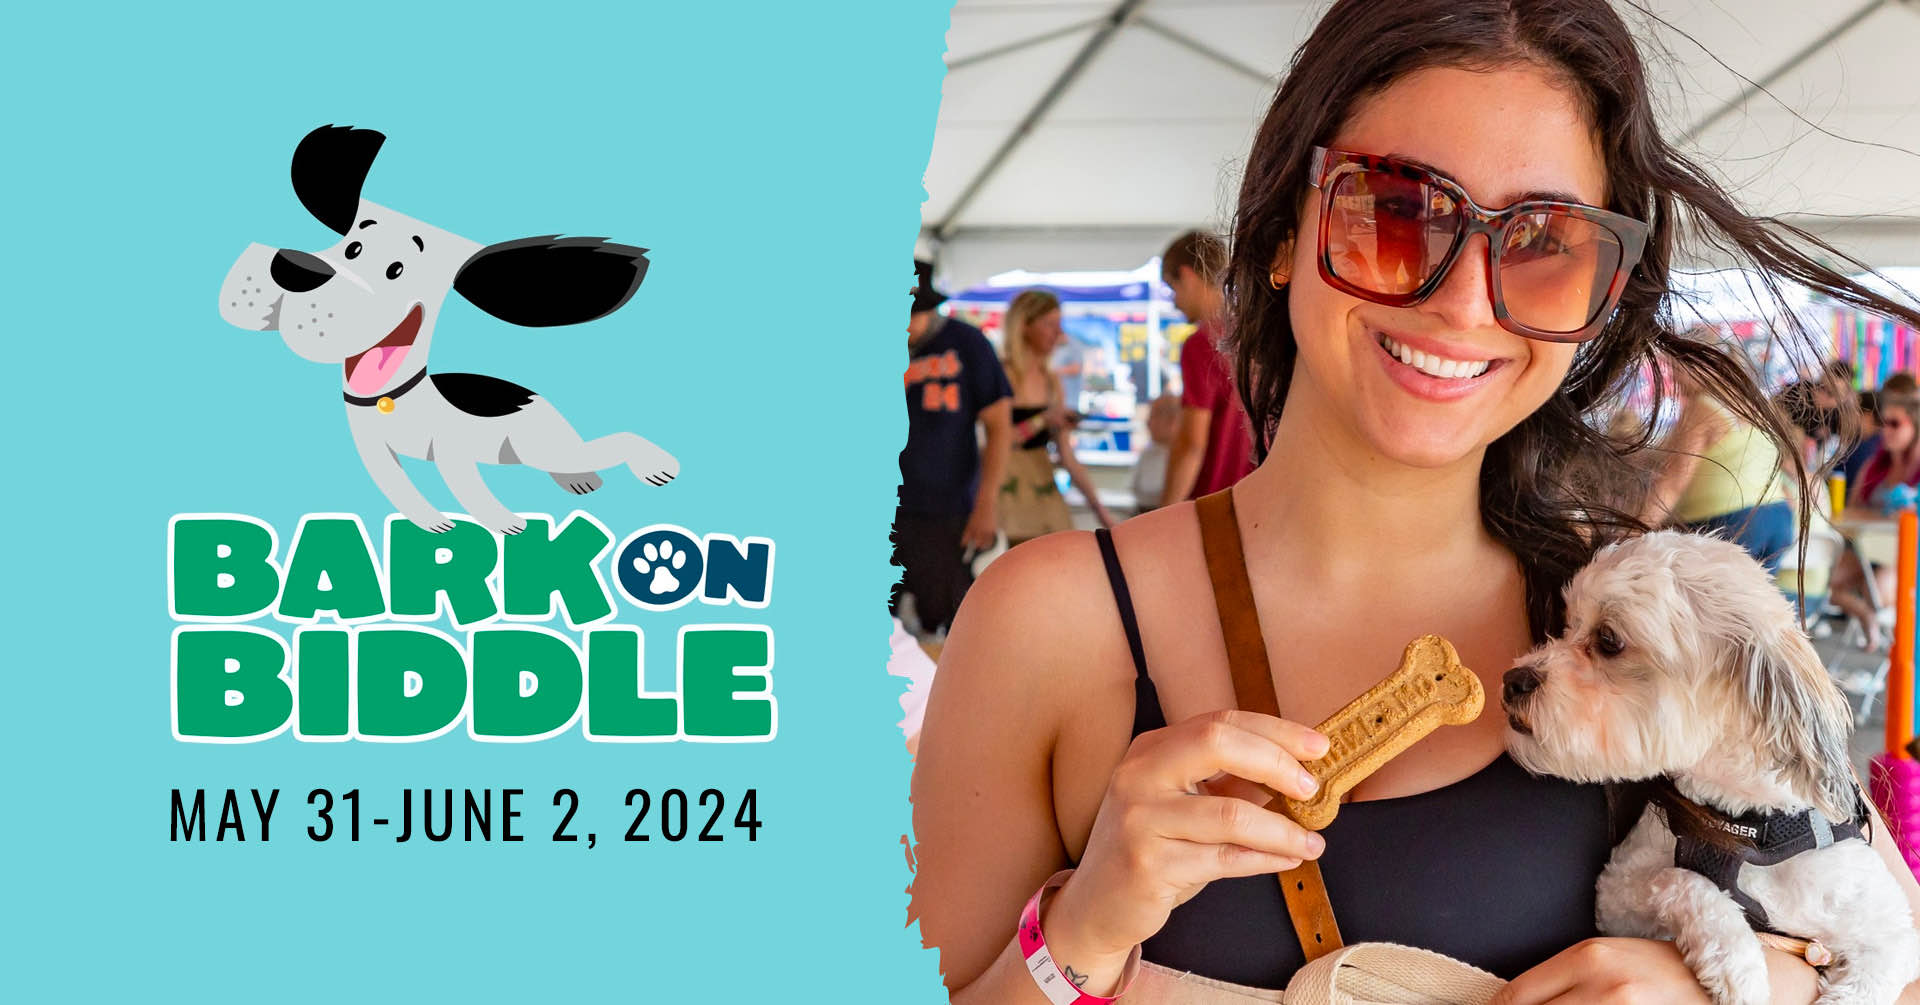 Bark on Biddle; May 31 - June 2, 2024; image of brunette with large sunglasses holding a small white dog and a dog biscuit